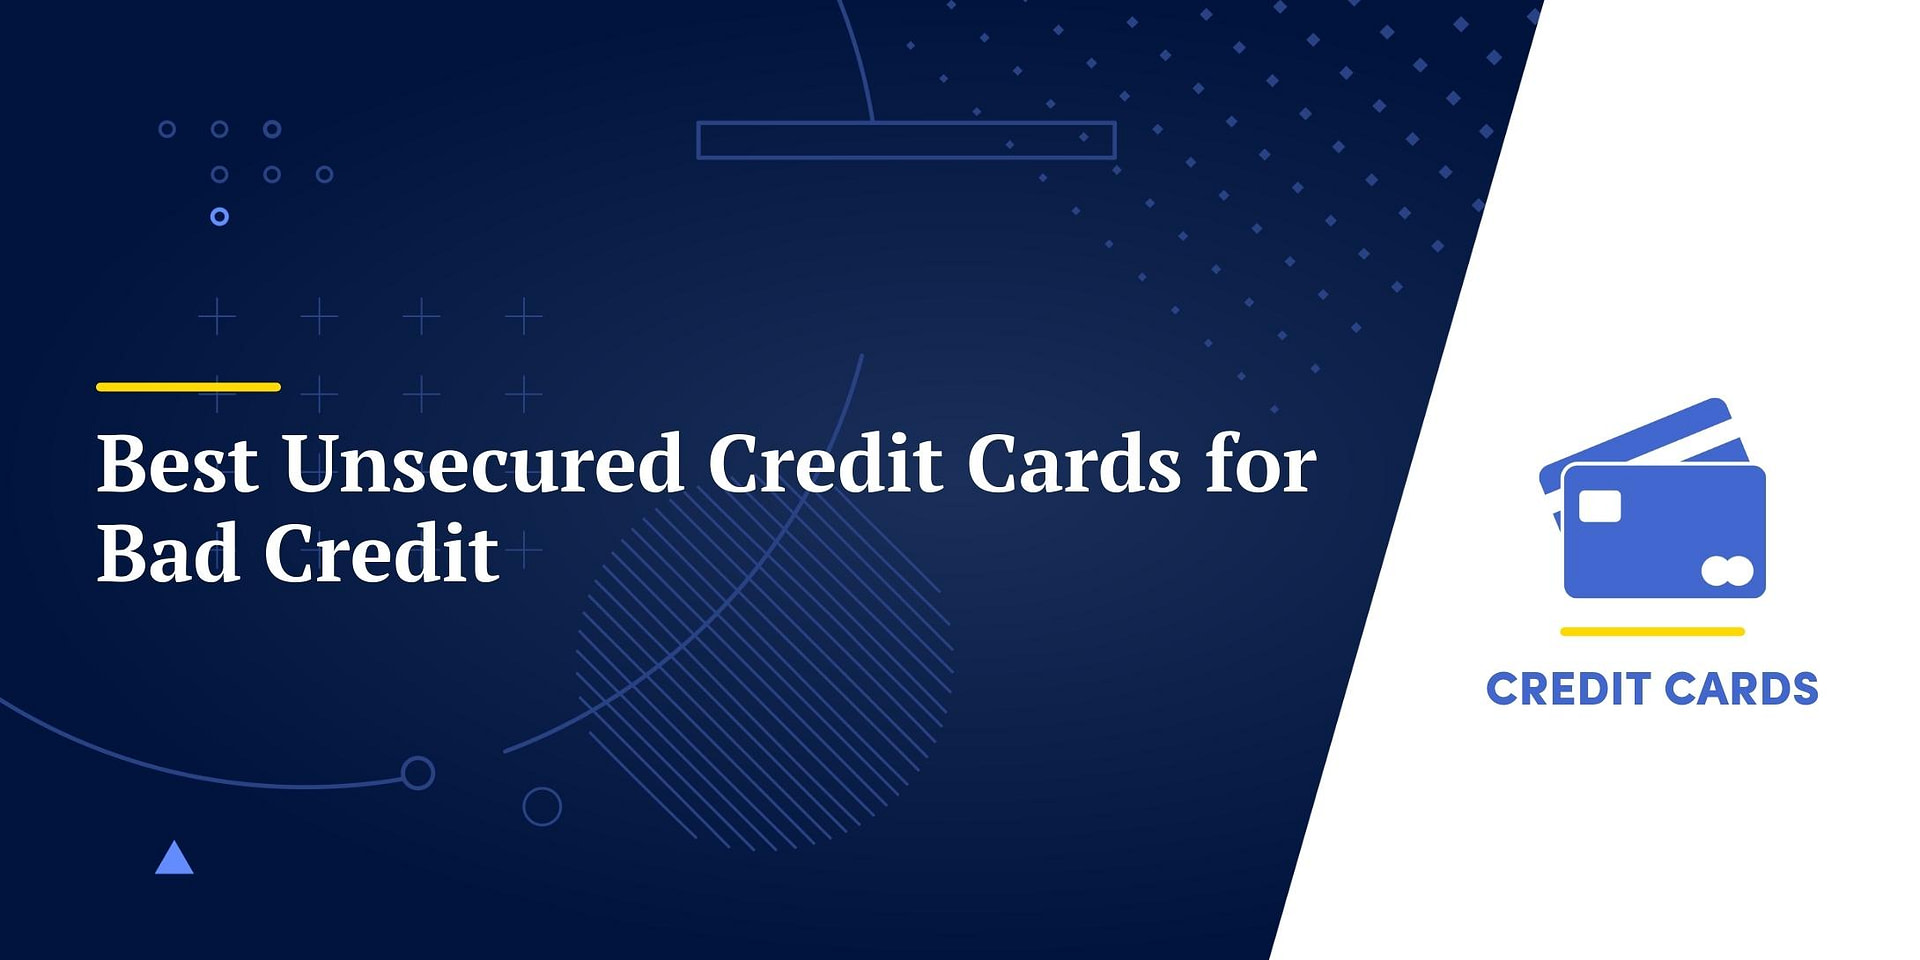 5 Best Unsecured Credit Cards for Bad Credit in 2023